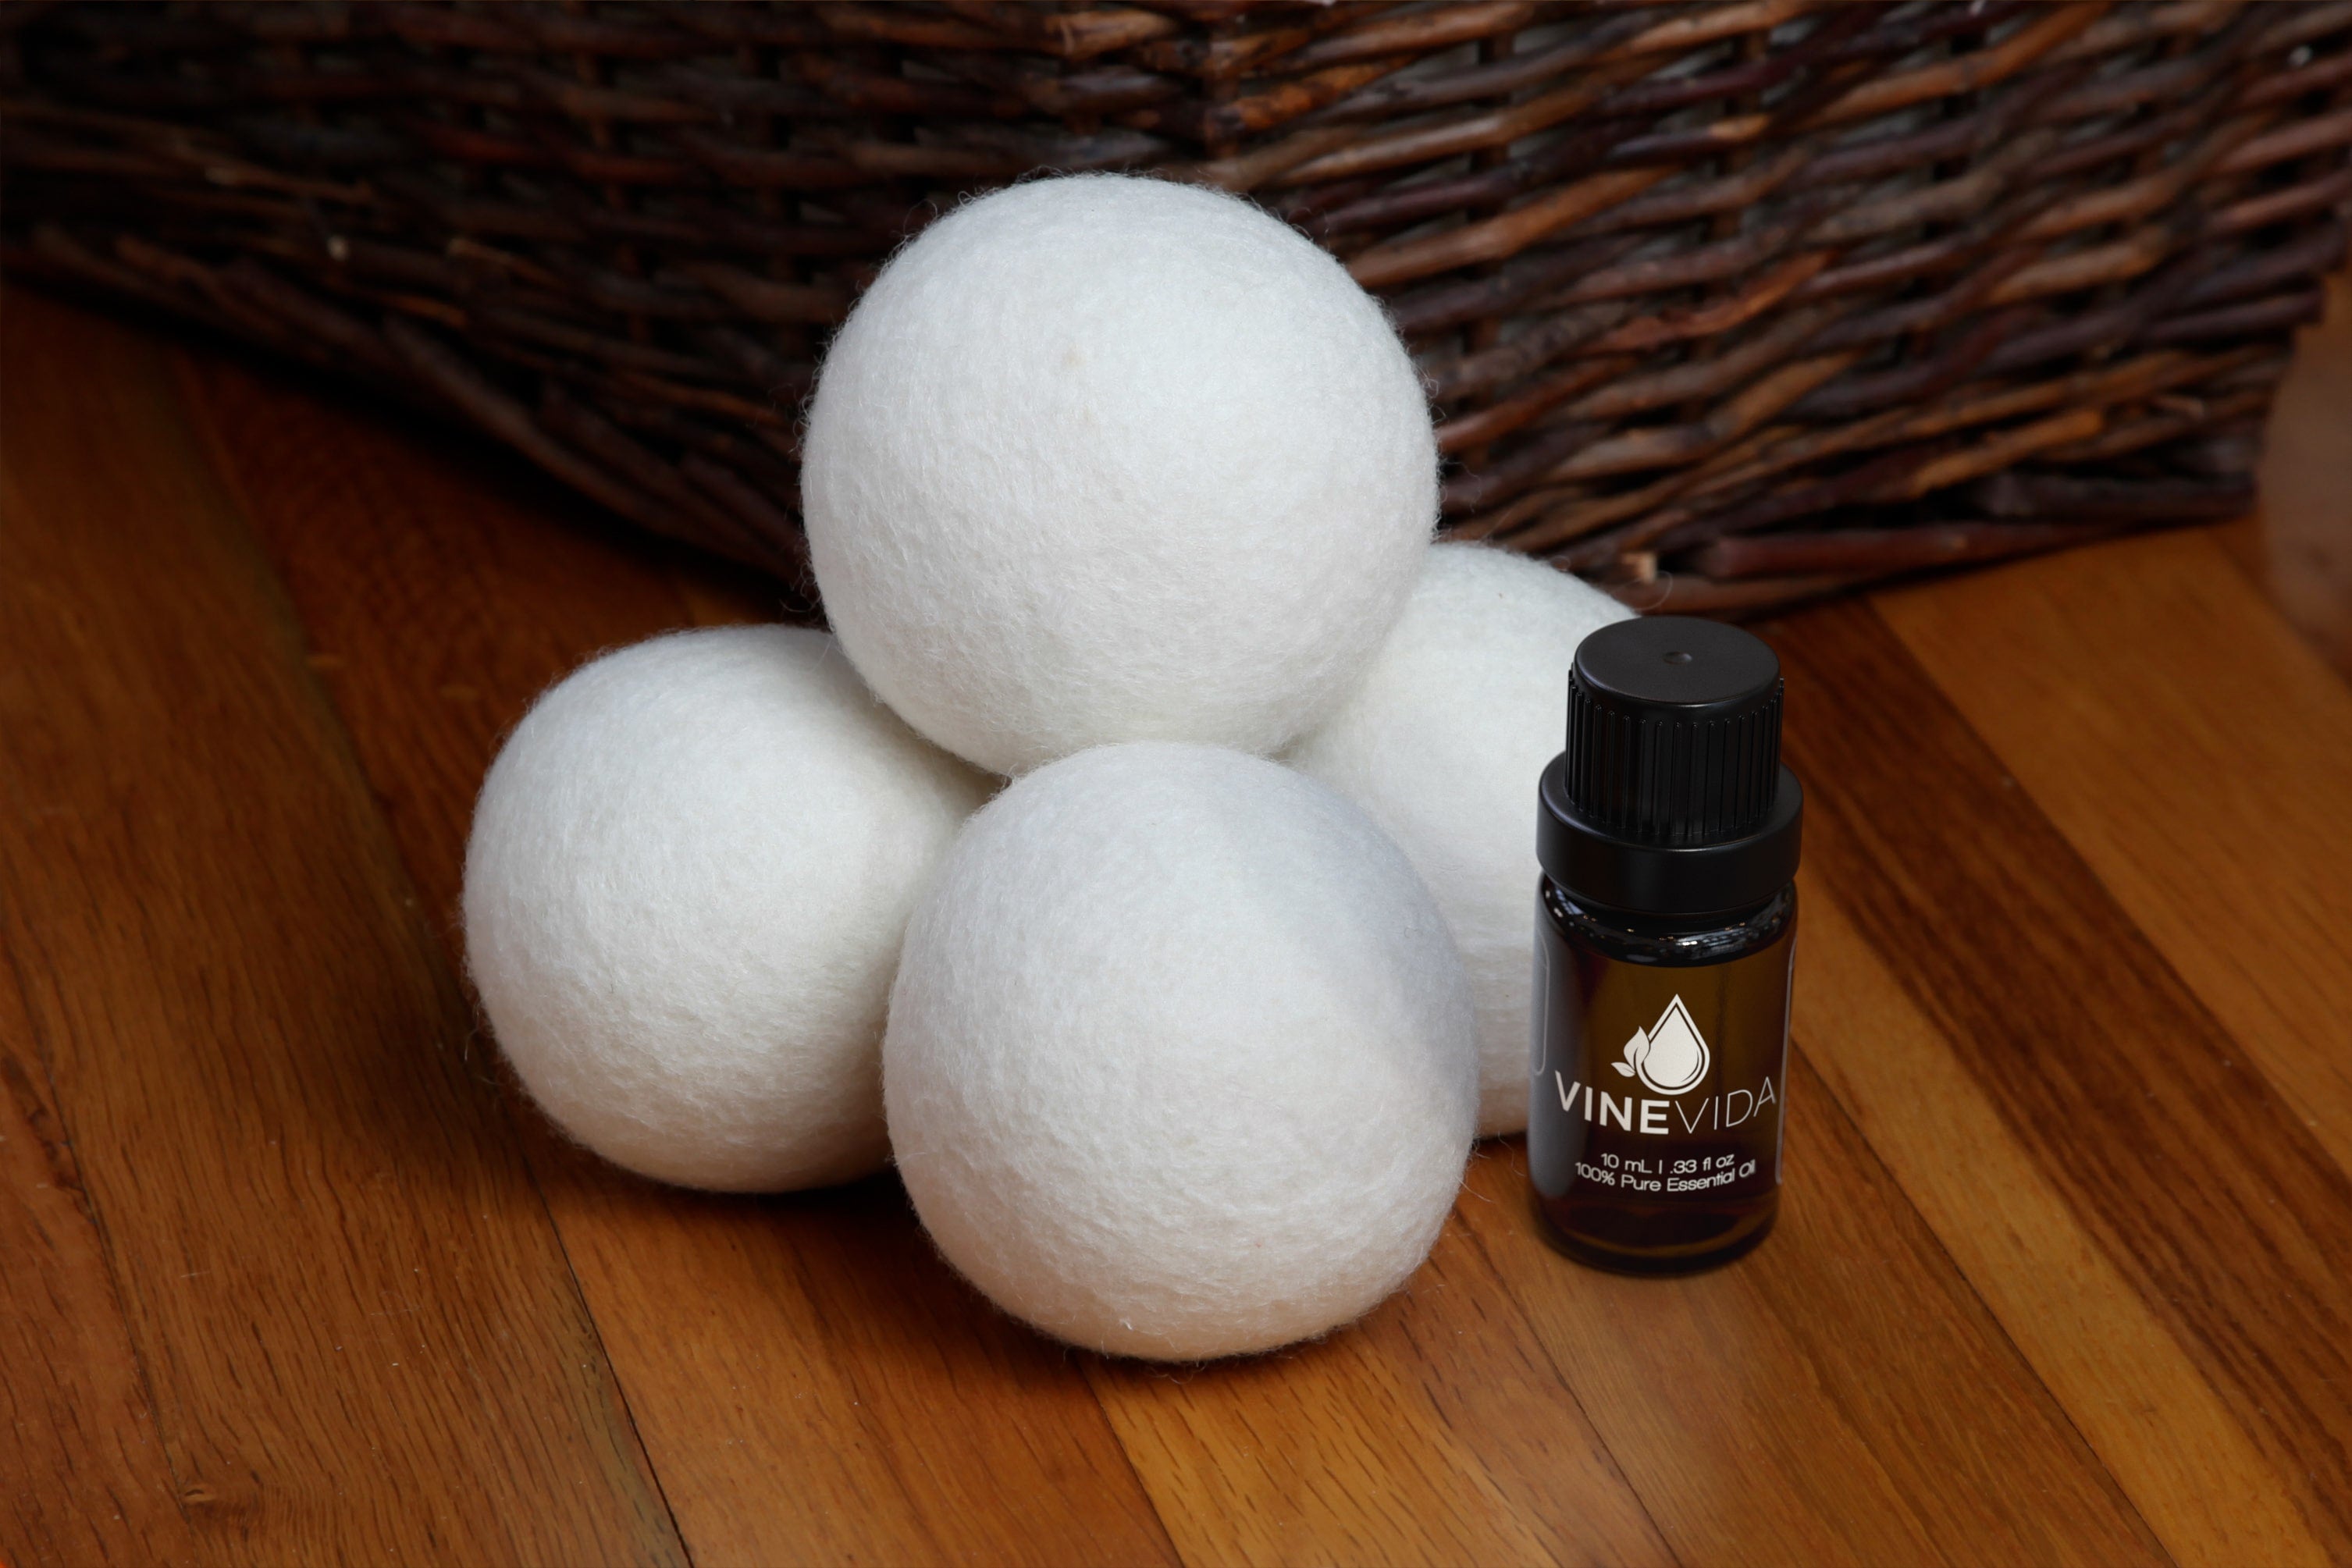 BEST ESSENTIAL OILS FOR LAUNDRY